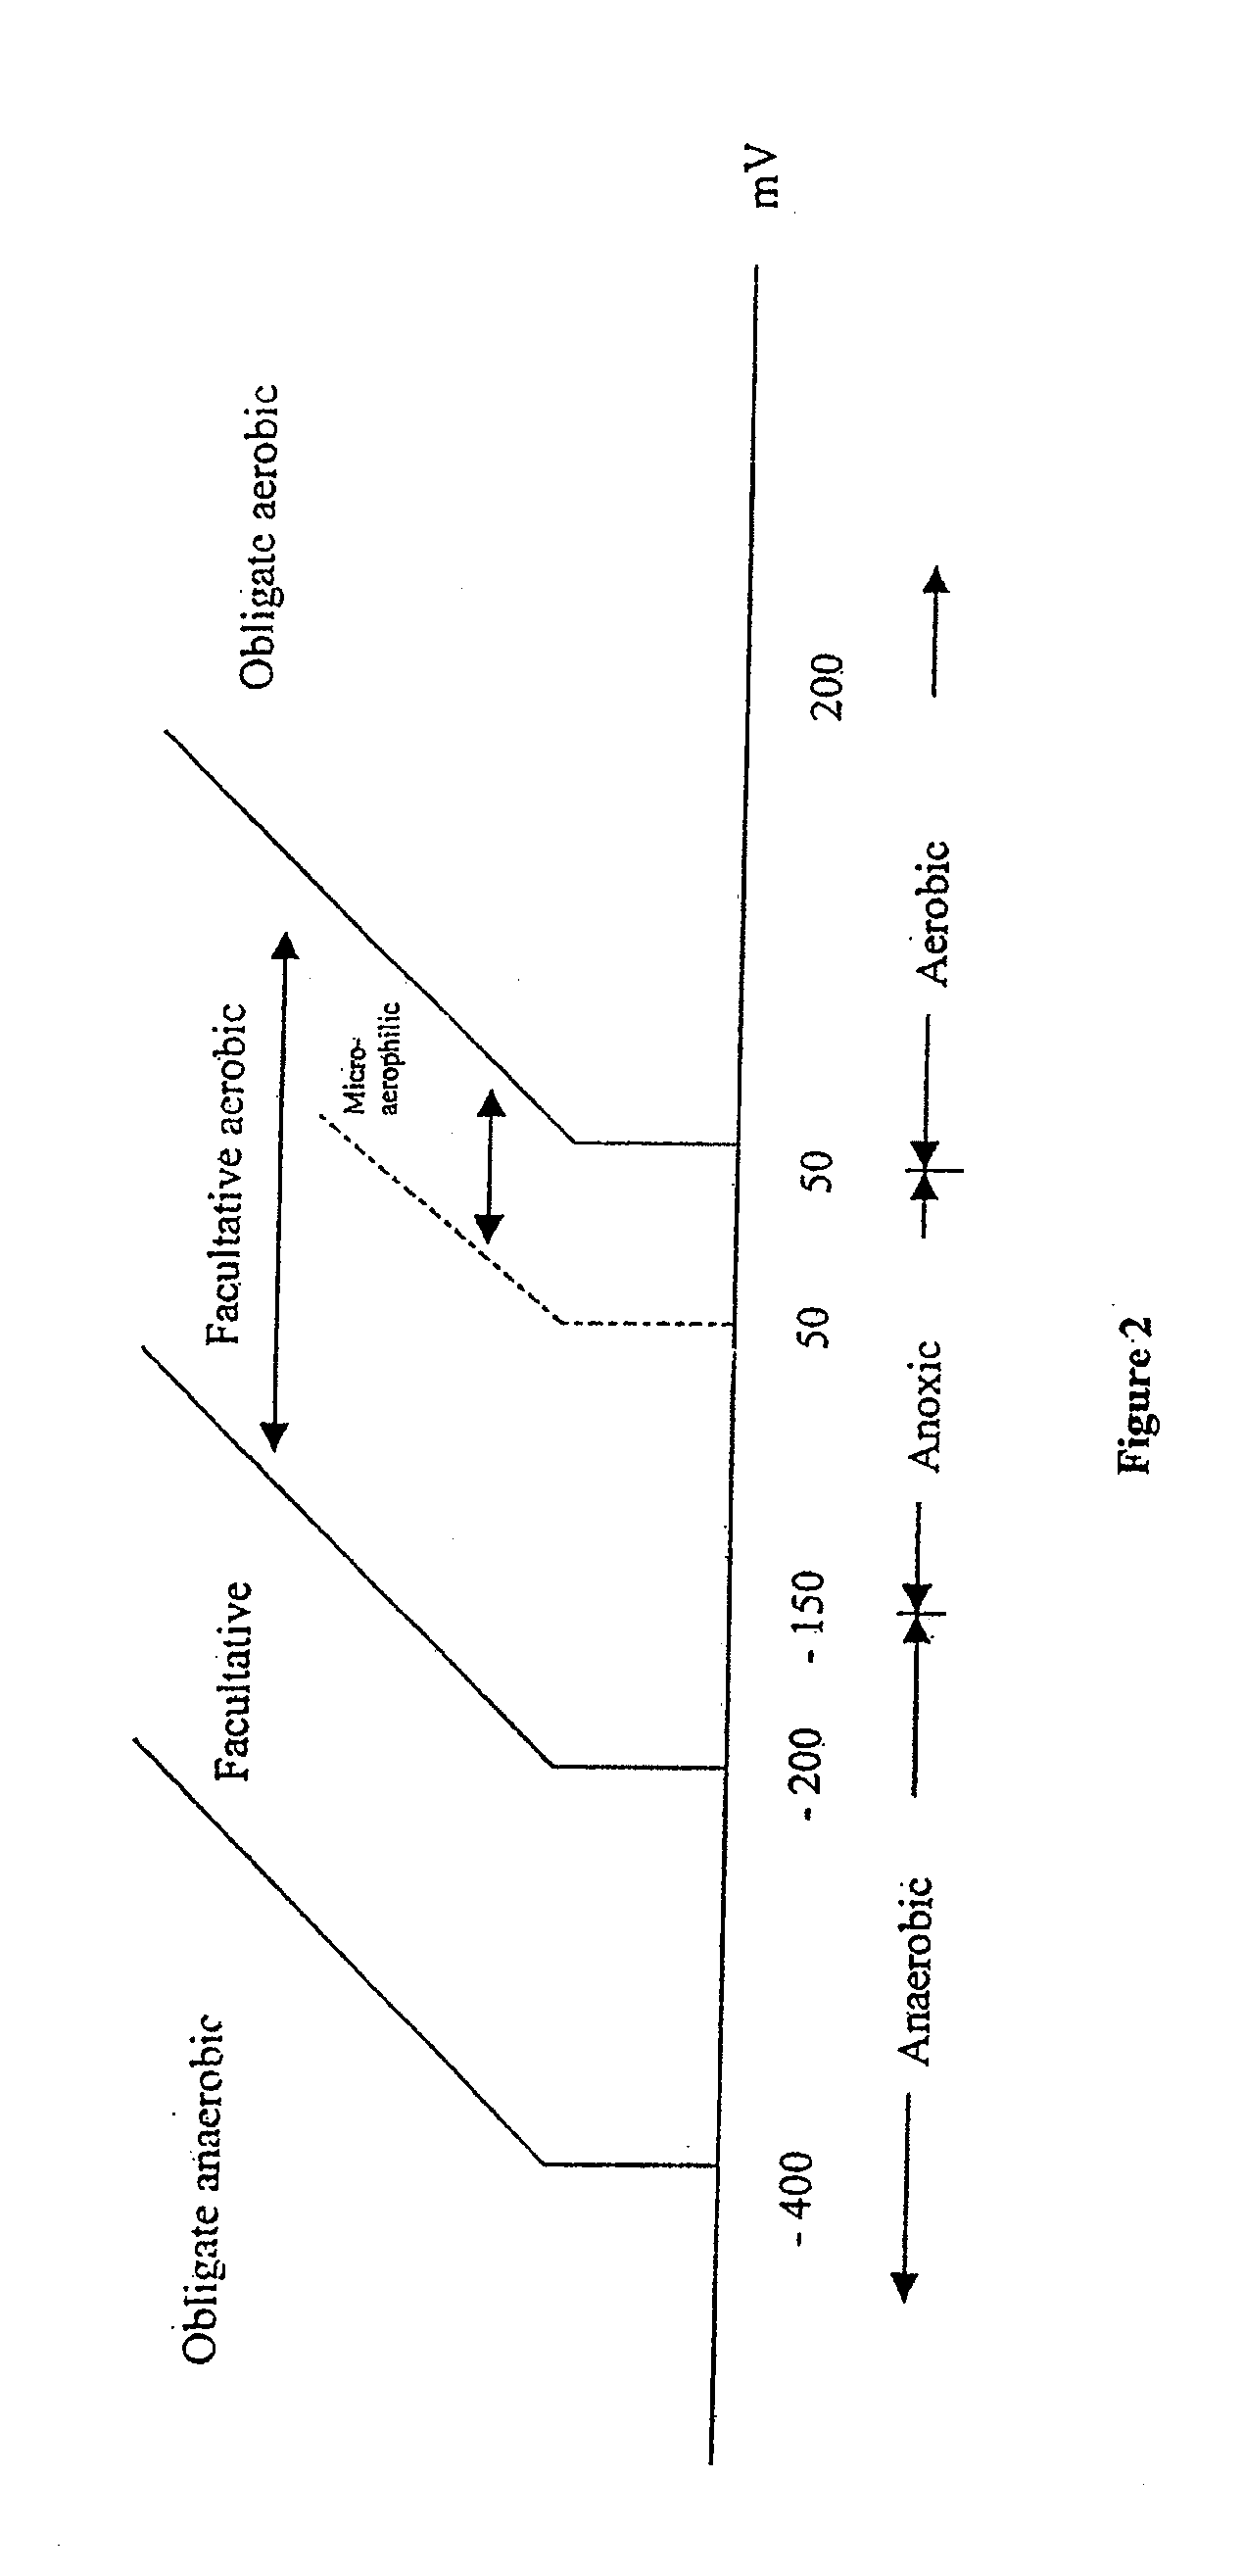 Apparatus and methods for control of waste treatment processes